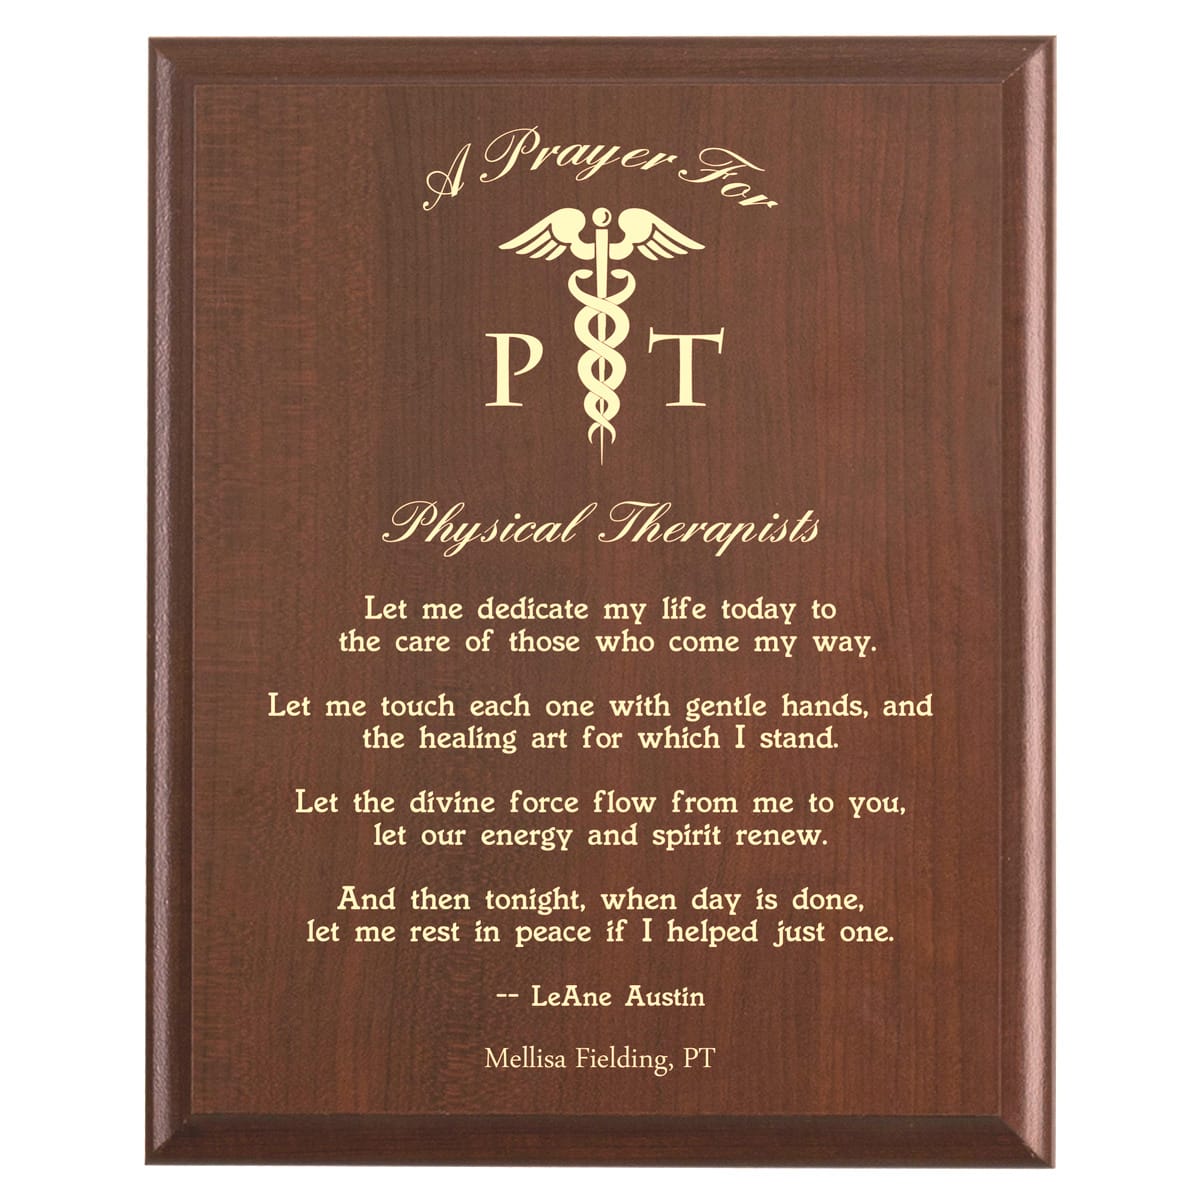 Plaque photo: Physical Therapist Prayer Plaque design with free personalization. Wood style finish with customized text.